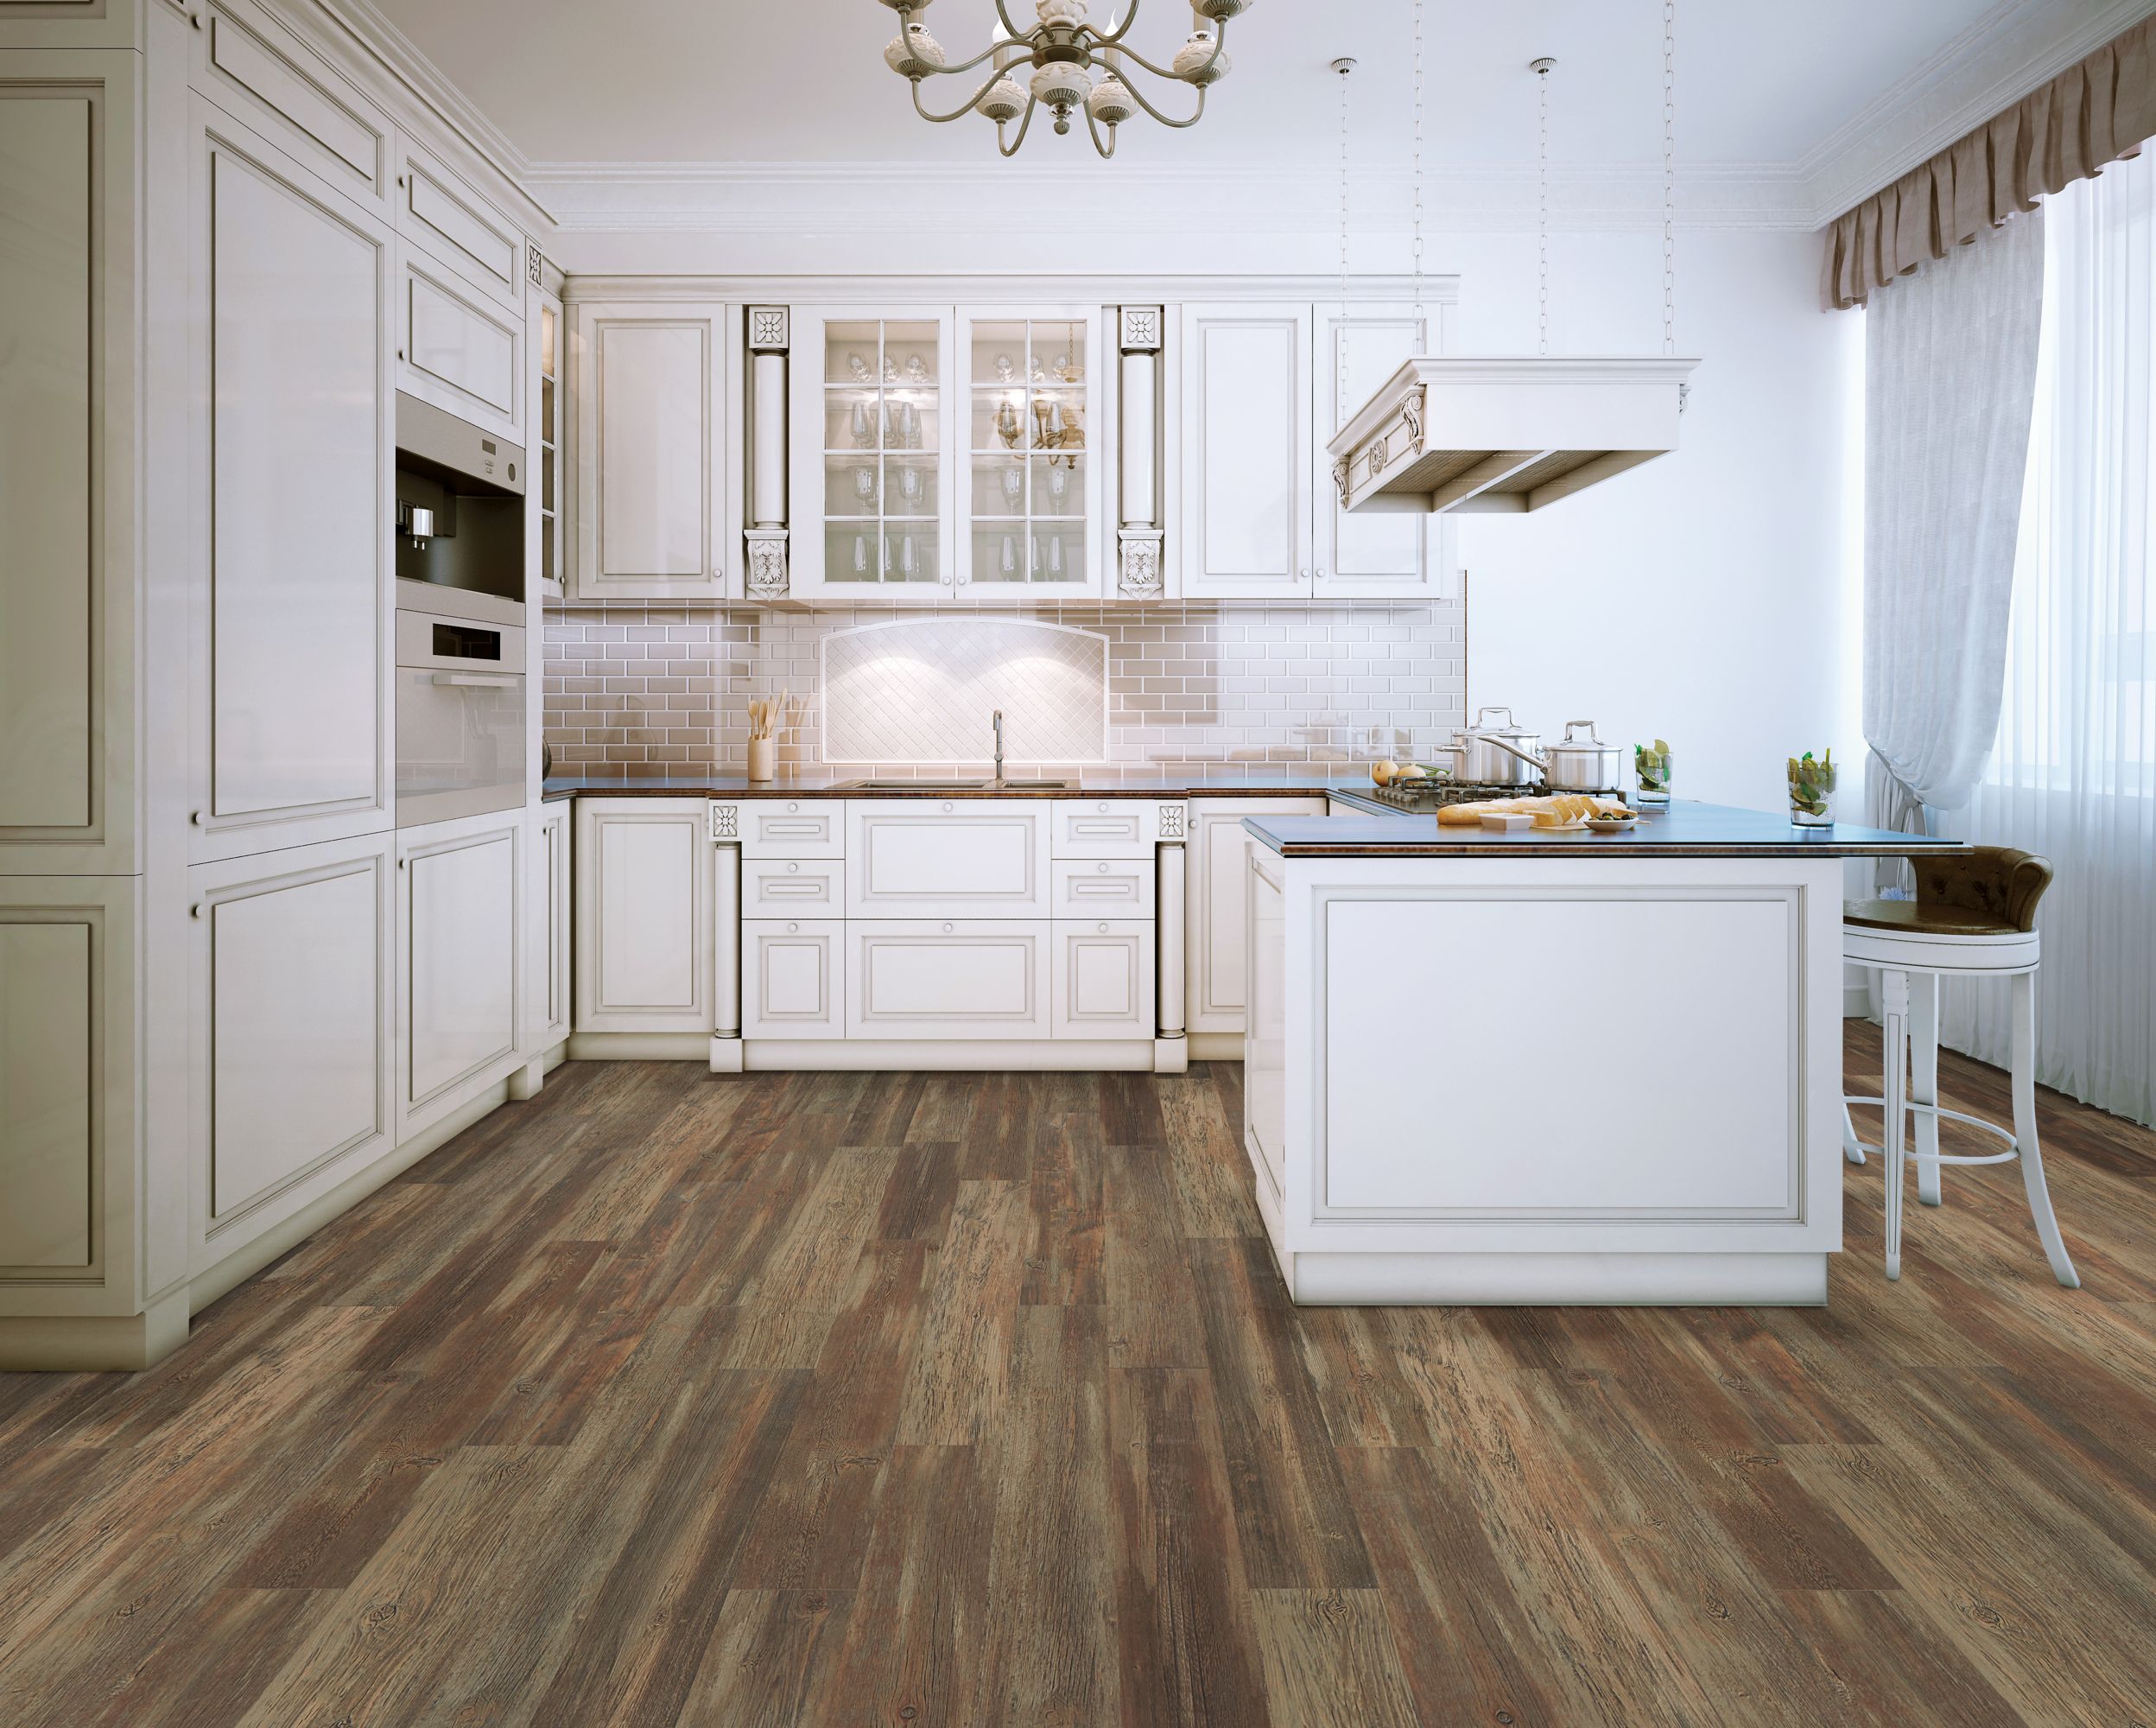 Traditional white kitchen with brown wood floors